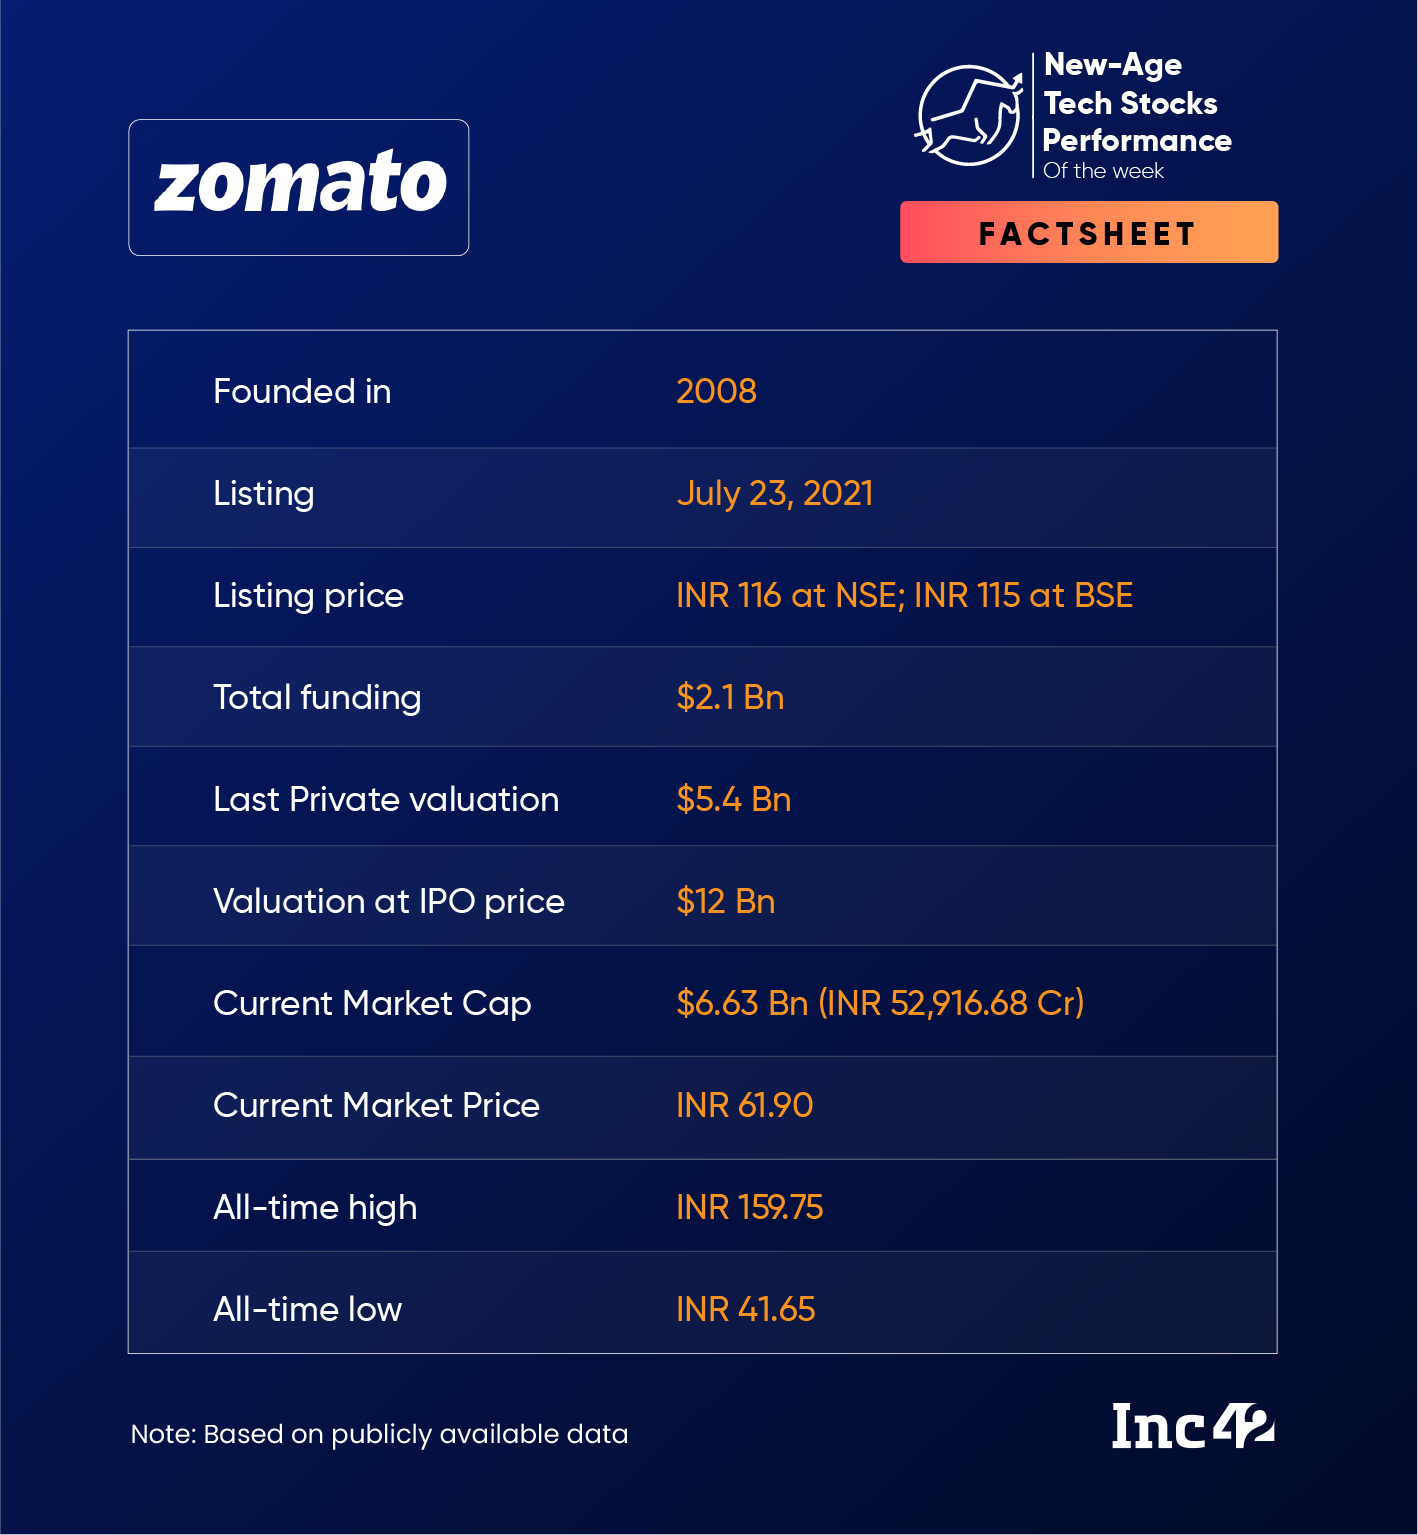 Zomato One Of The Top Gainers In Nifty 500 This Month